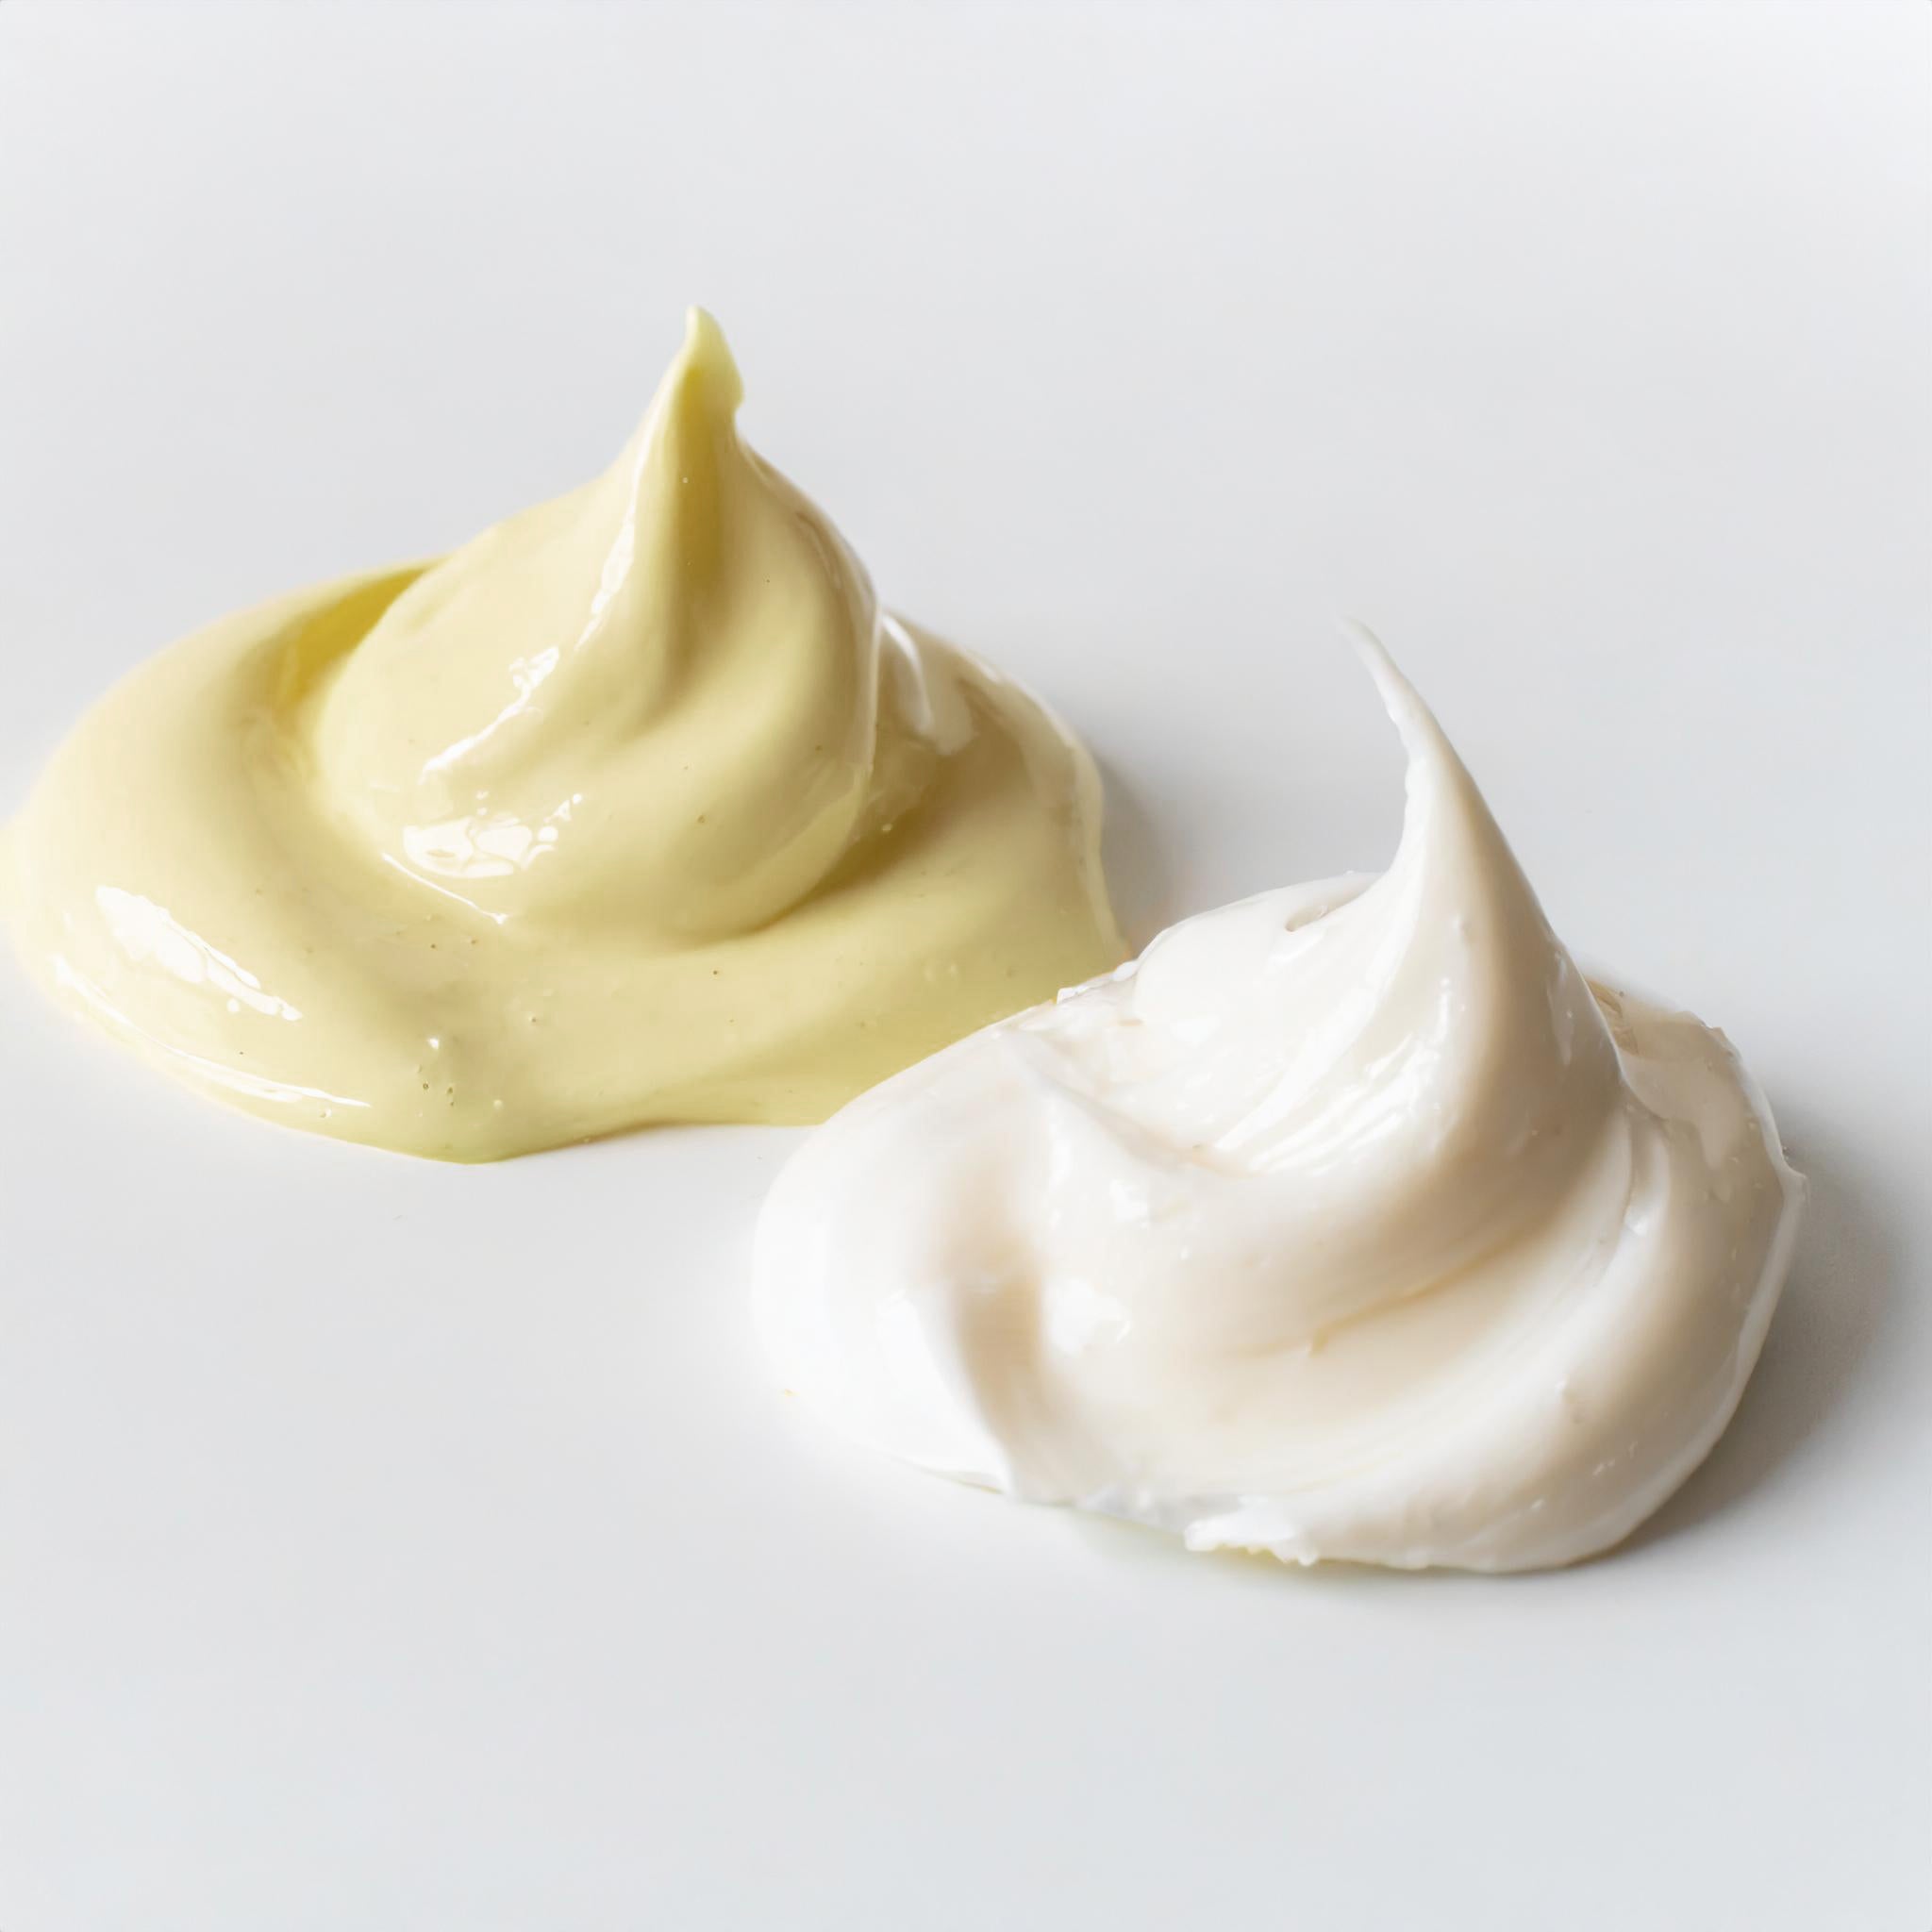 an image of 2 different colored dollops of cream, one buttery yellow and one off-white